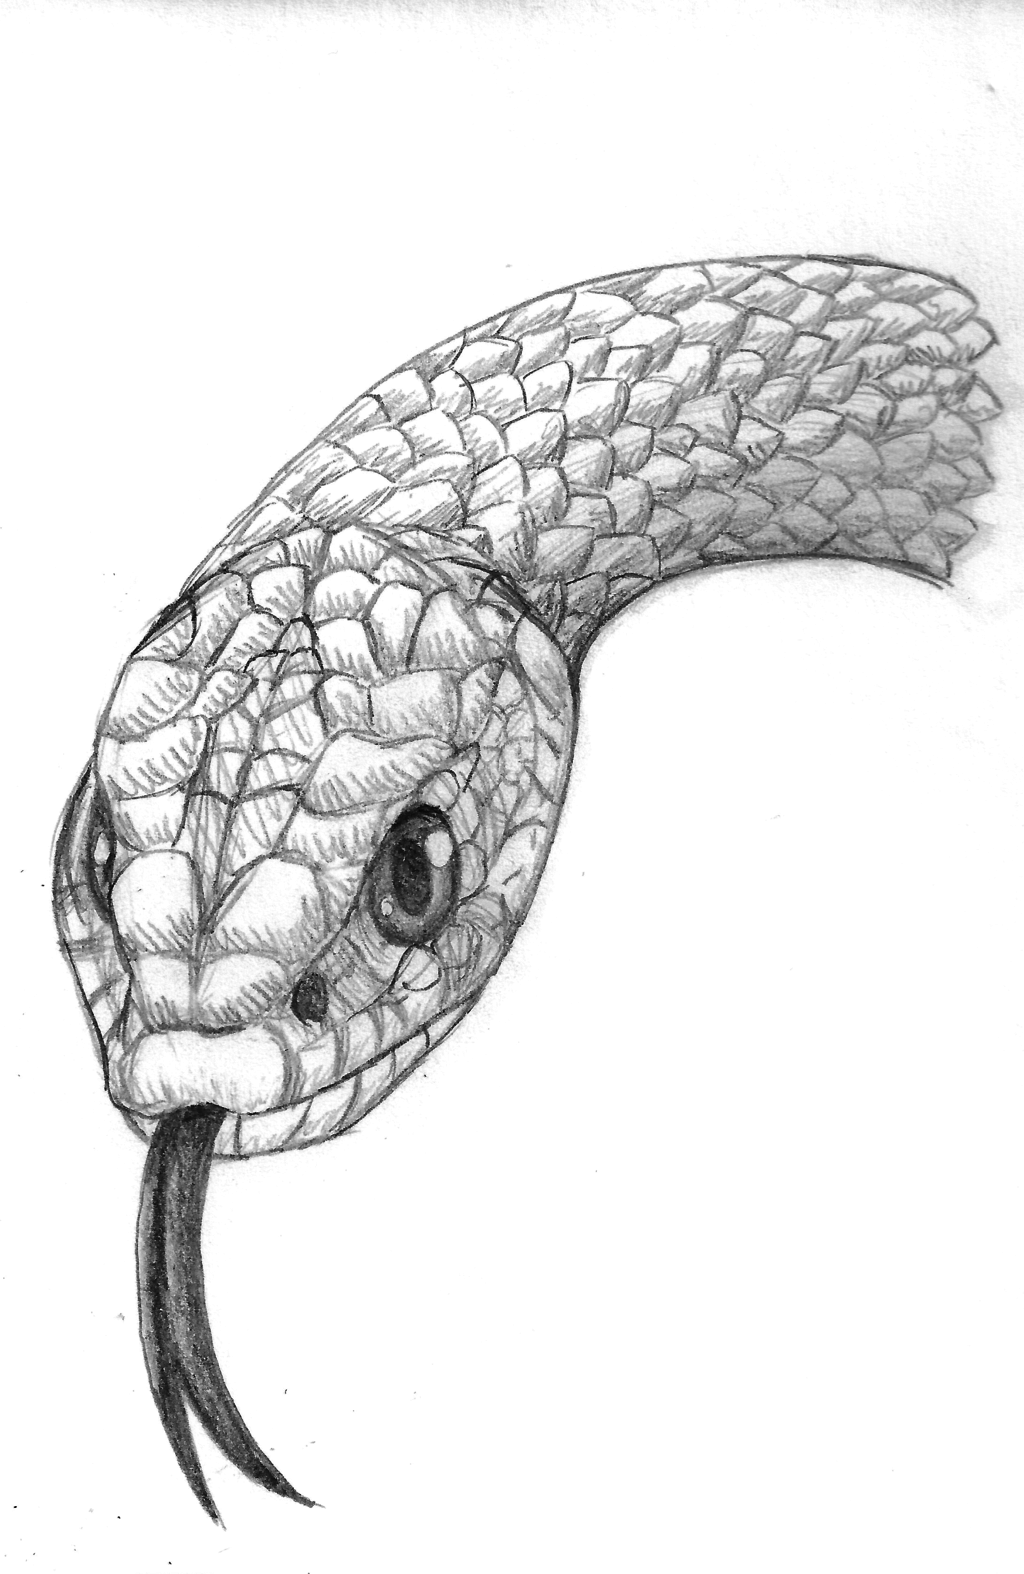 Free Viper Head Drawing, Download Free Viper Head Drawing png images